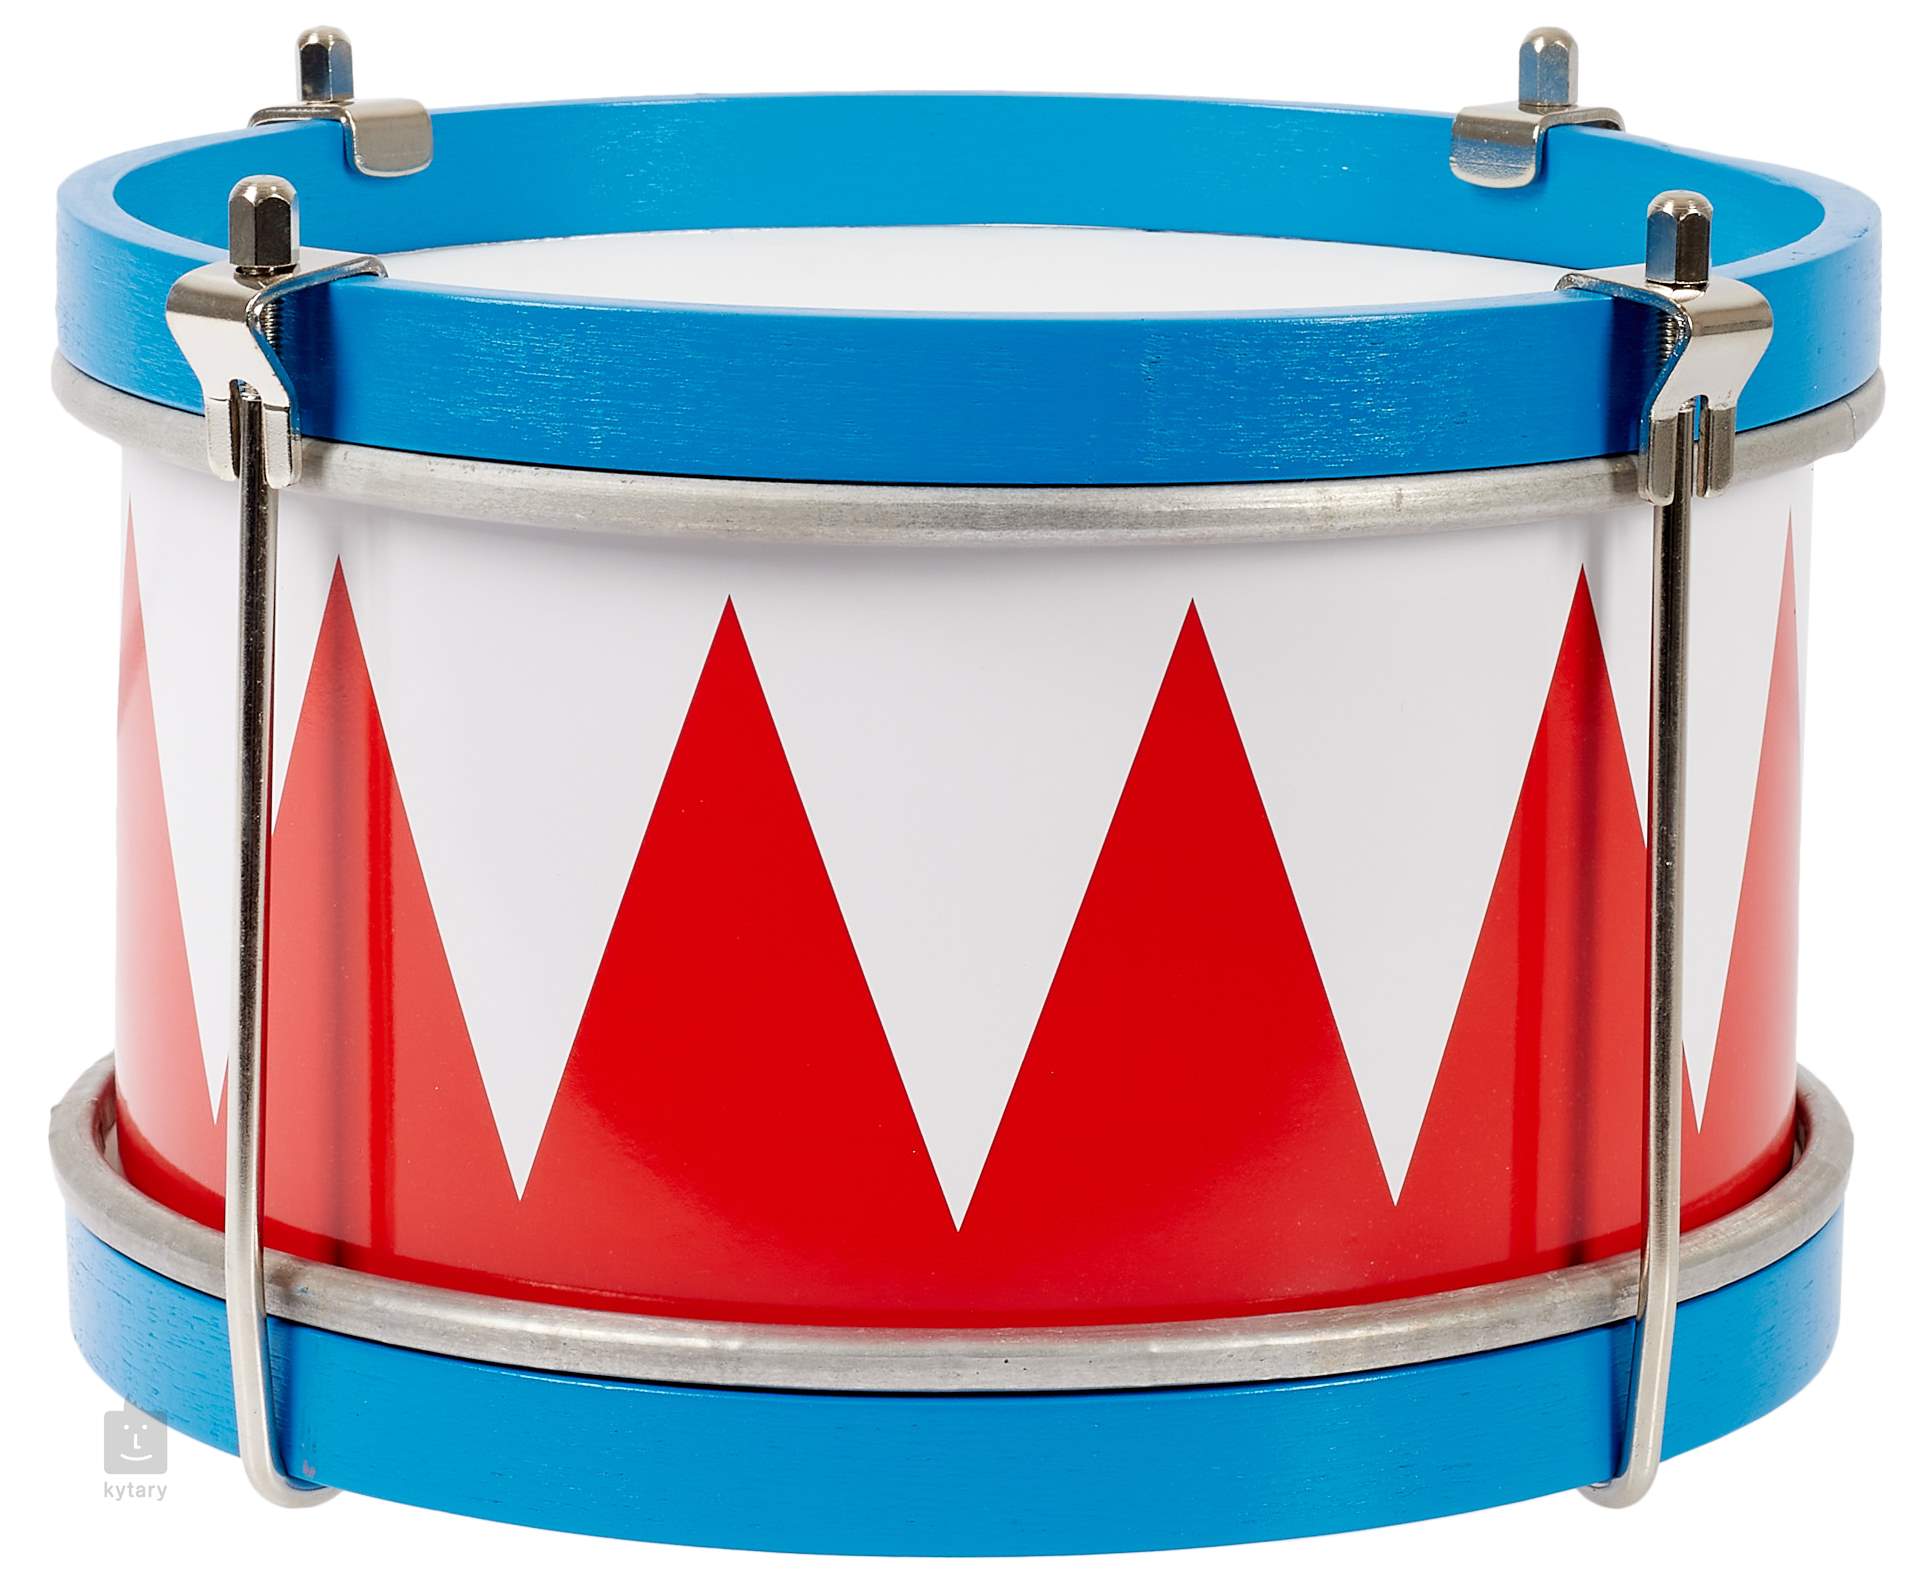 PP WORLD PERCUSSION PP4020 Wooden Marching Drum